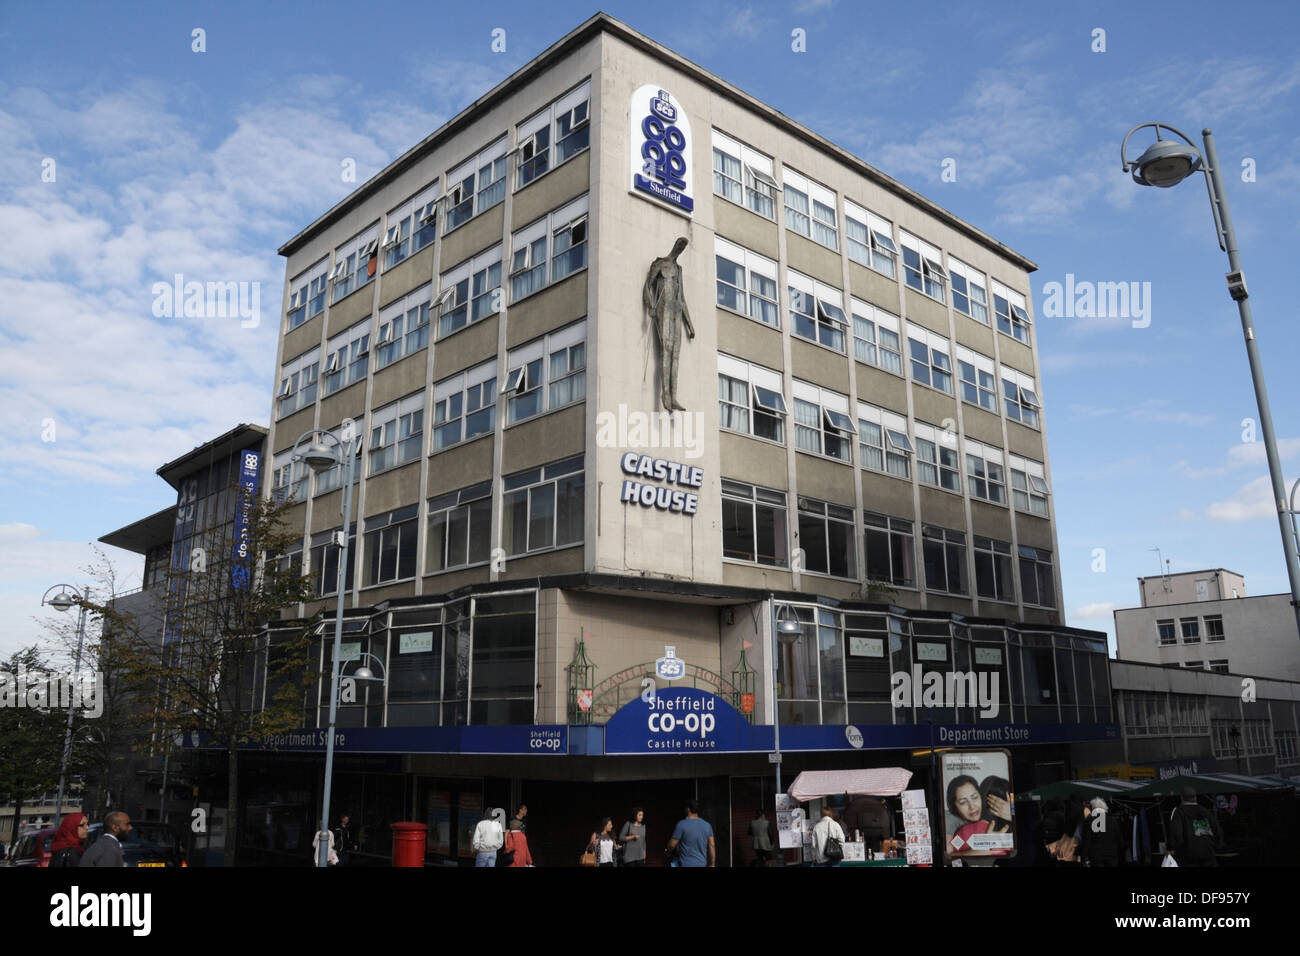 The Sheffield Co-op Castle House building on Snig Hill City centre England 1960s brutalist architecture former department store. Vulcan sculpture Stock Photo